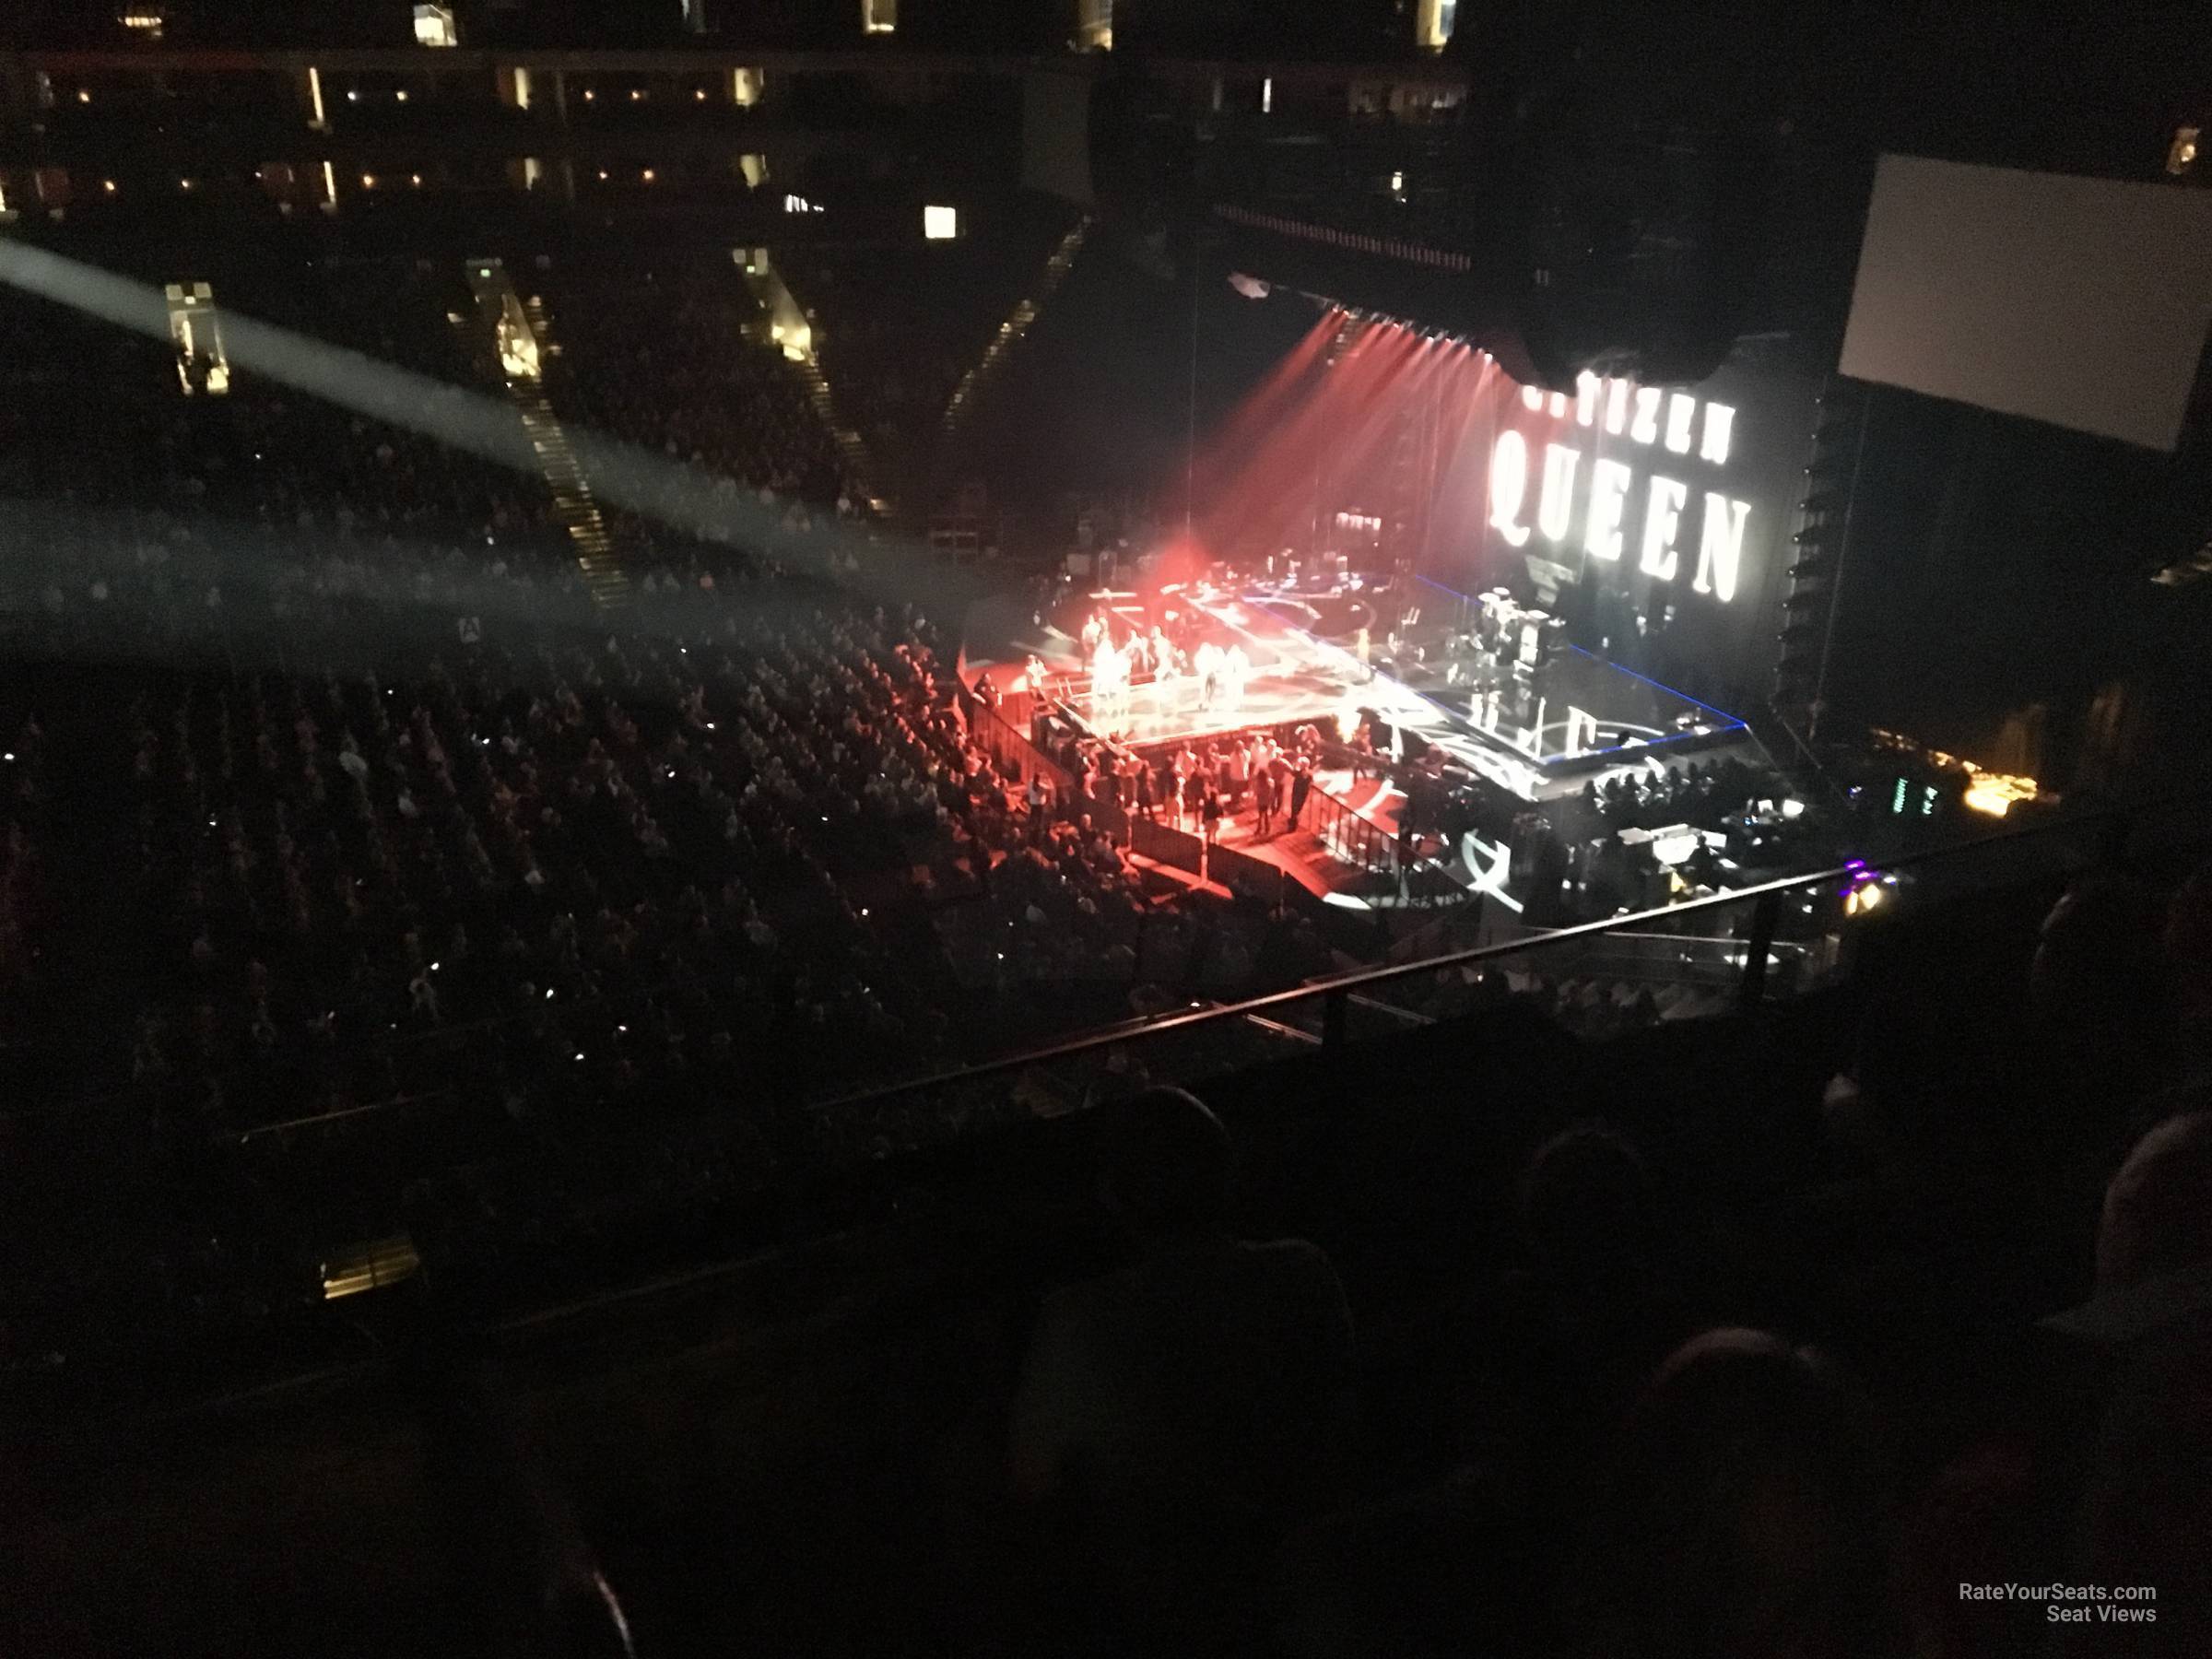 section 201, row 3 seat view  - oakland arena